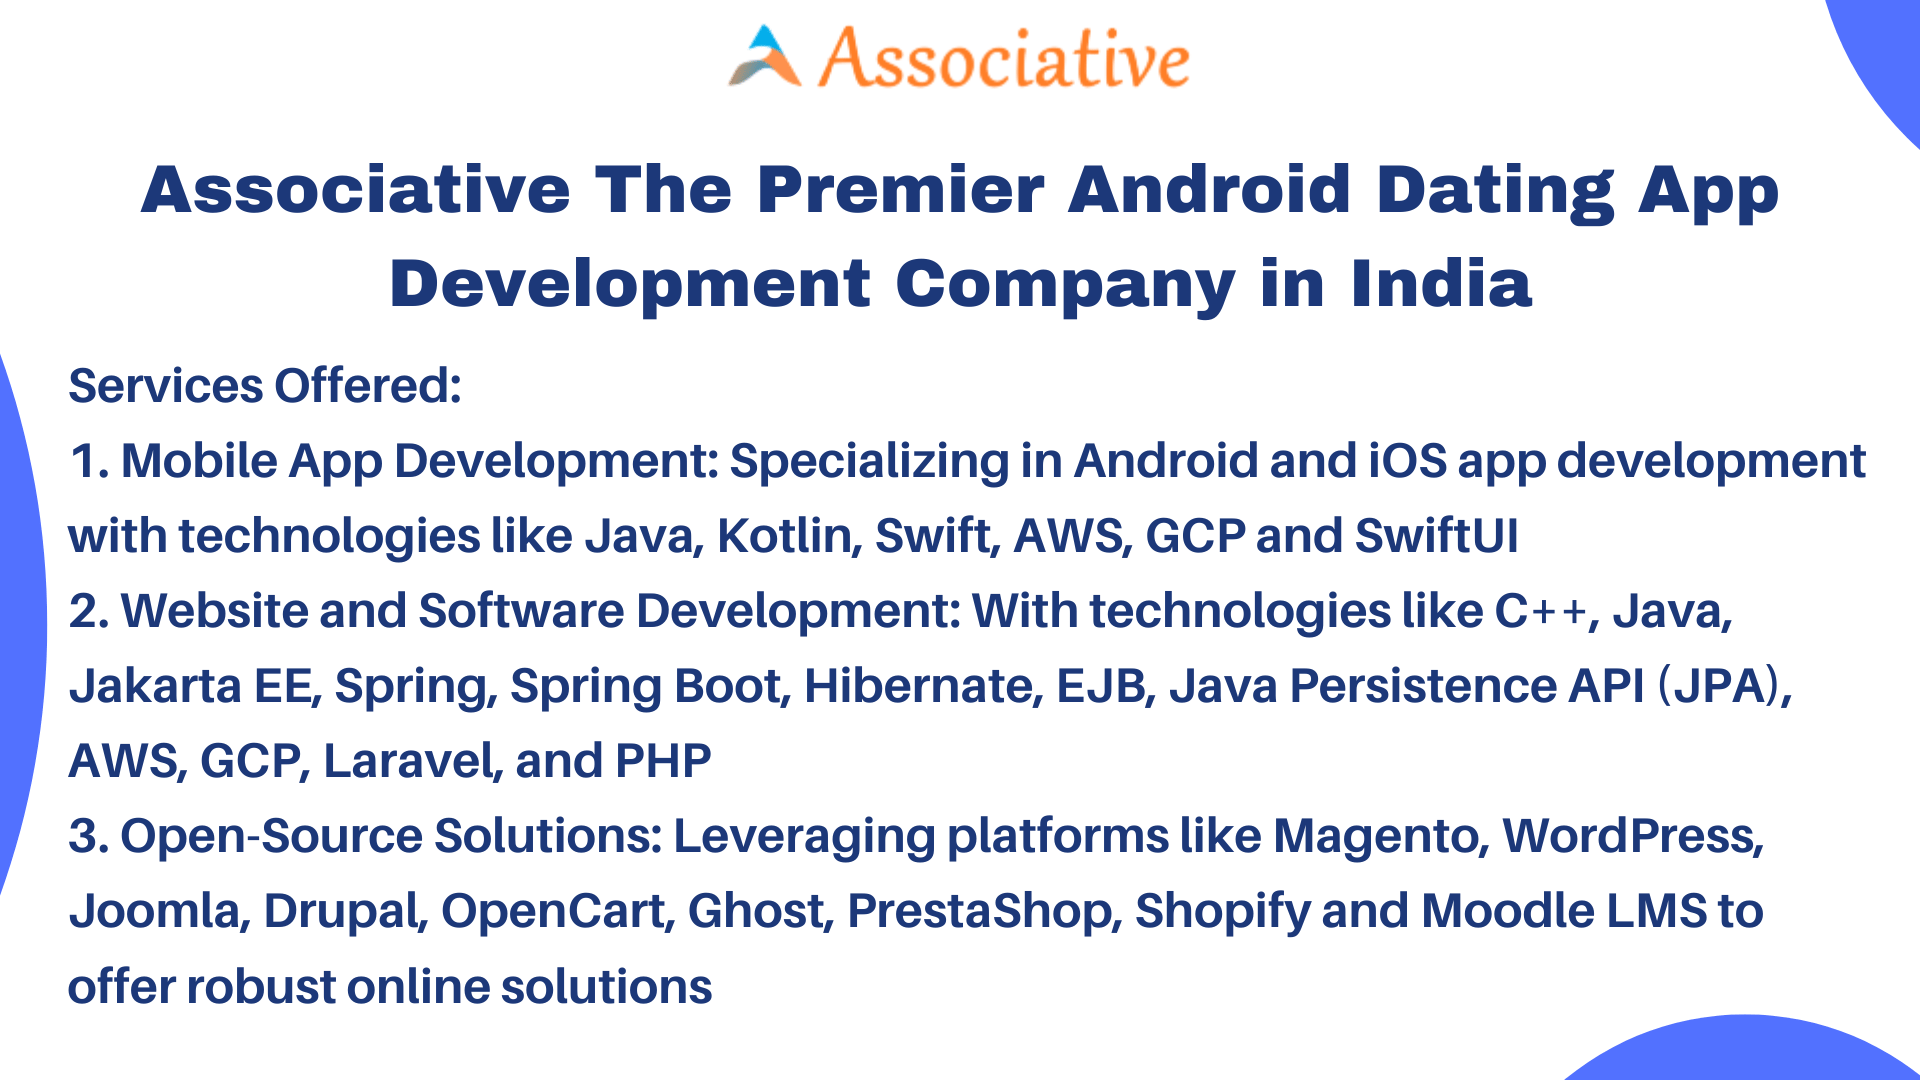 Associative The Premier Android Dating App Development Company in India